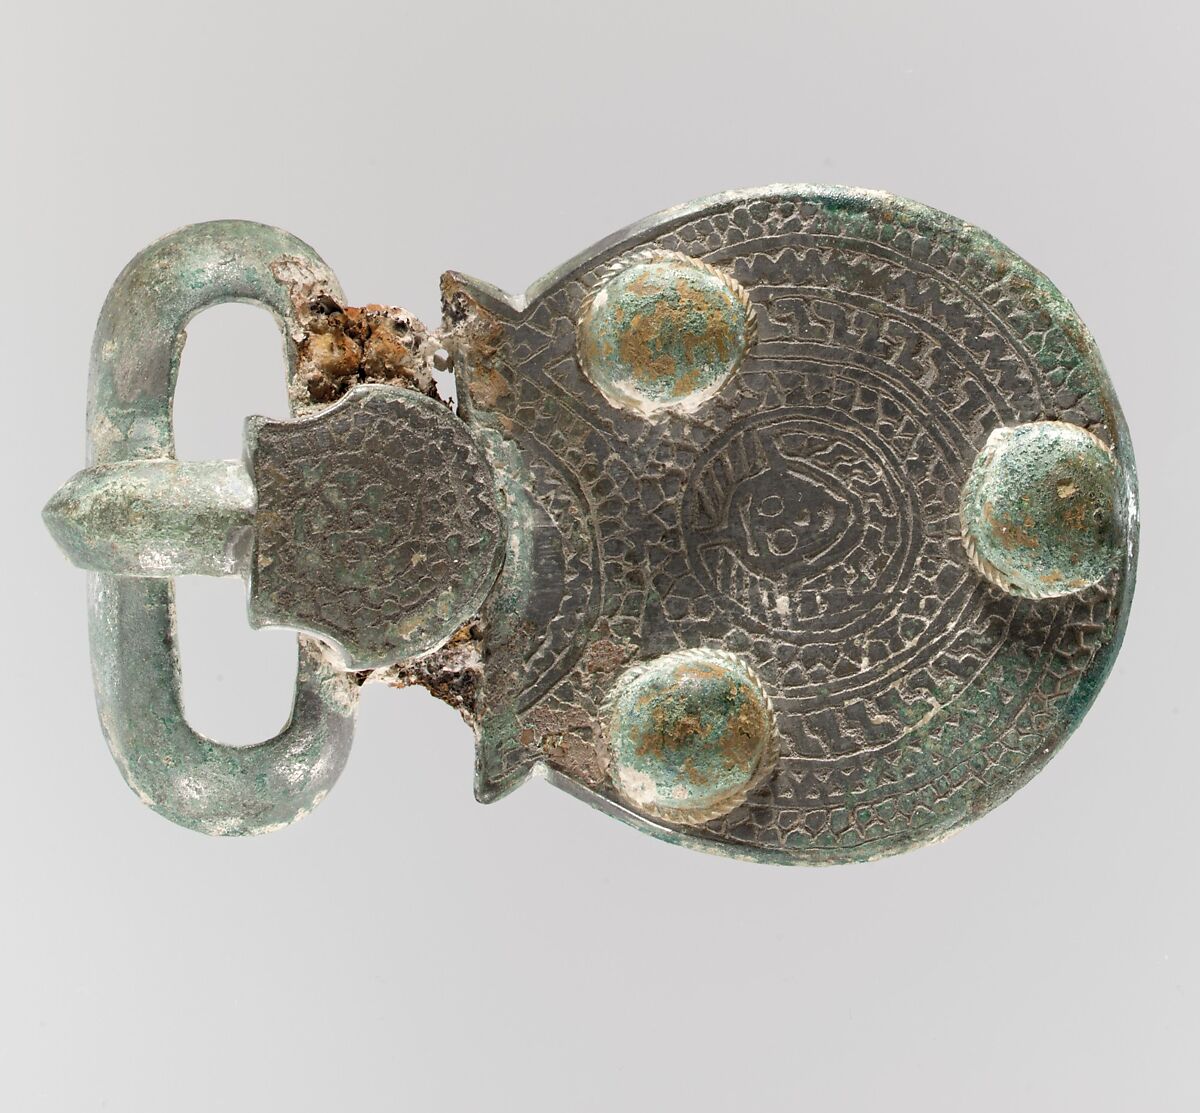 Belt Buckle, Copper alloy, "tinned" surface, Frankish 